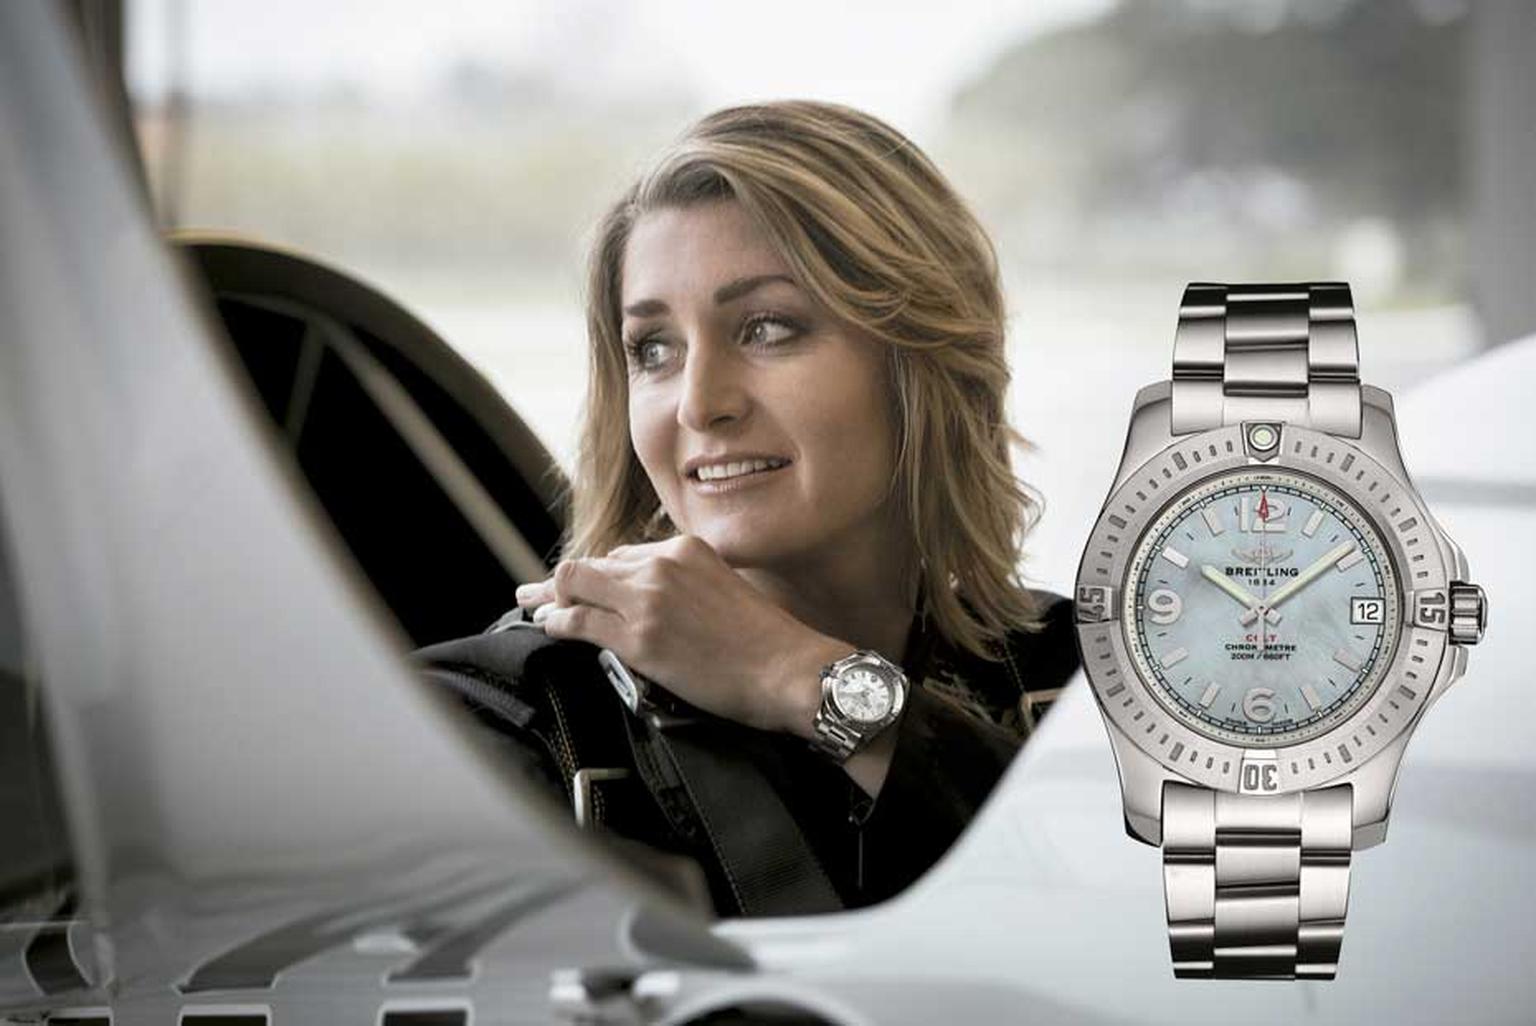 Breitling ladies' watches are designed for active women who need ...